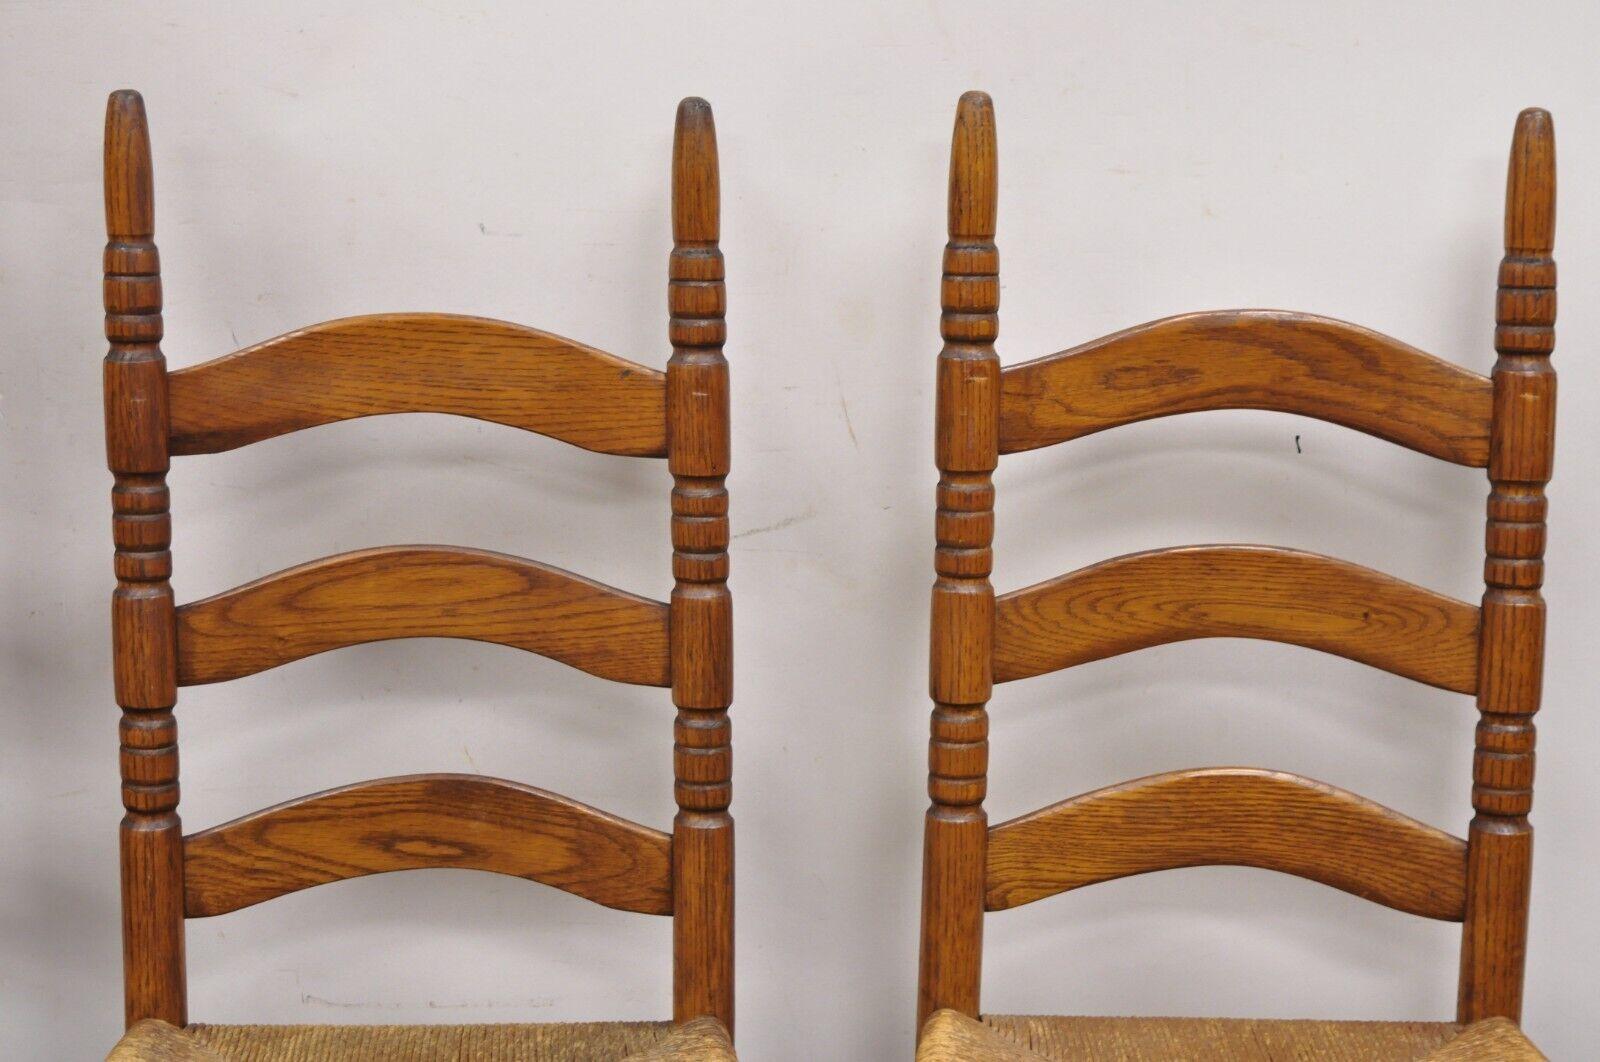 Early 20th Century Antique Ladderback Primitive Rustic Oak Wood Rush Seat Dining Chairs - Set of 4 For Sale